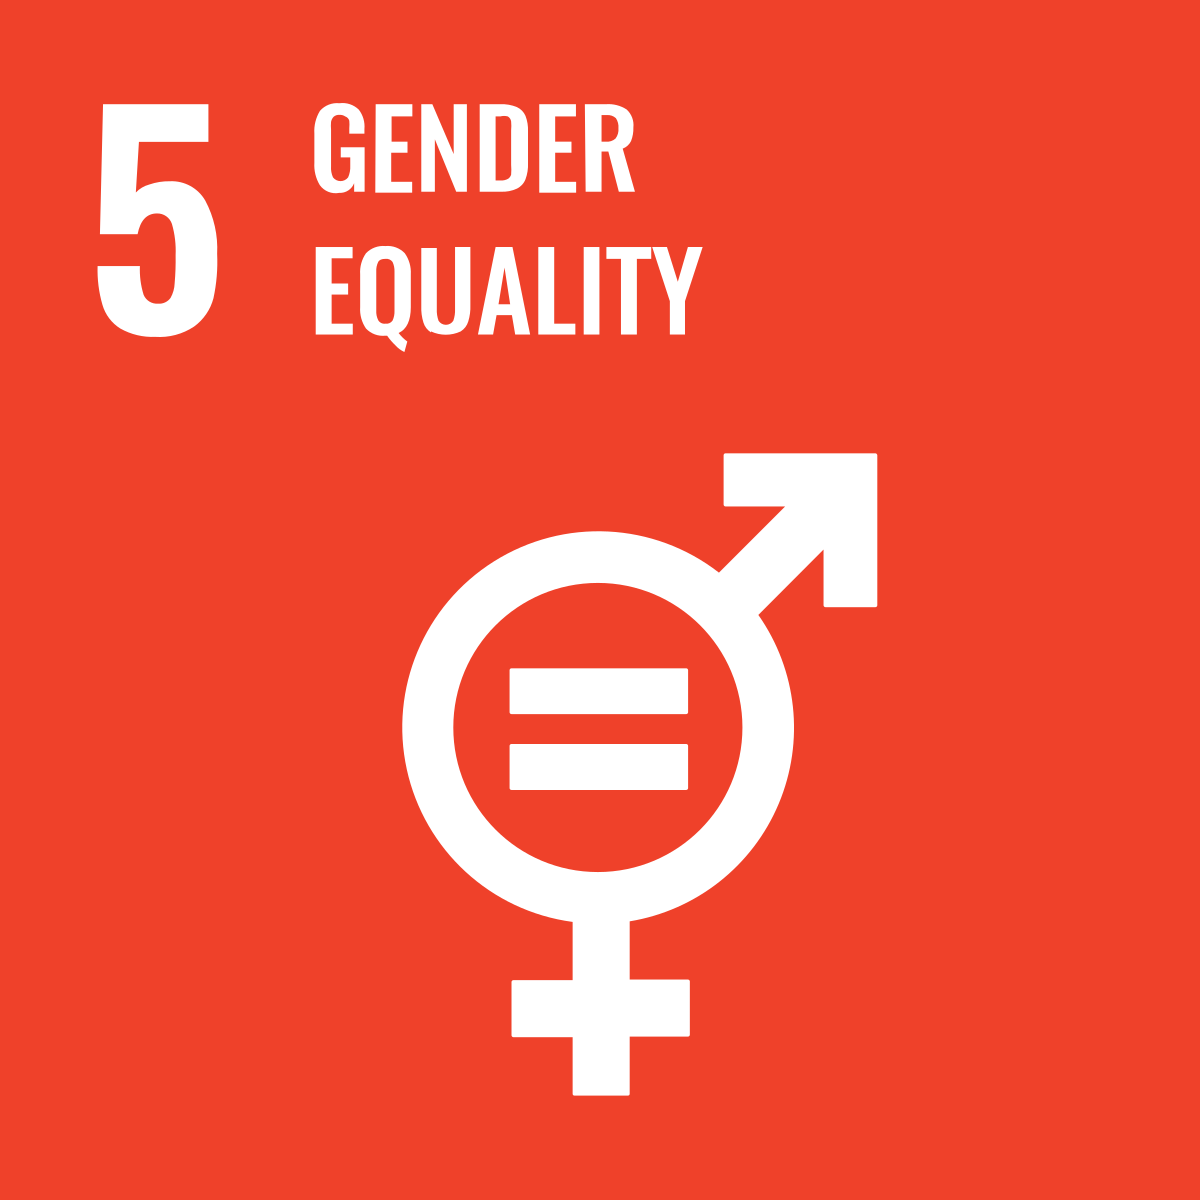 Sustainable Development Goals 5 - Gender Equality